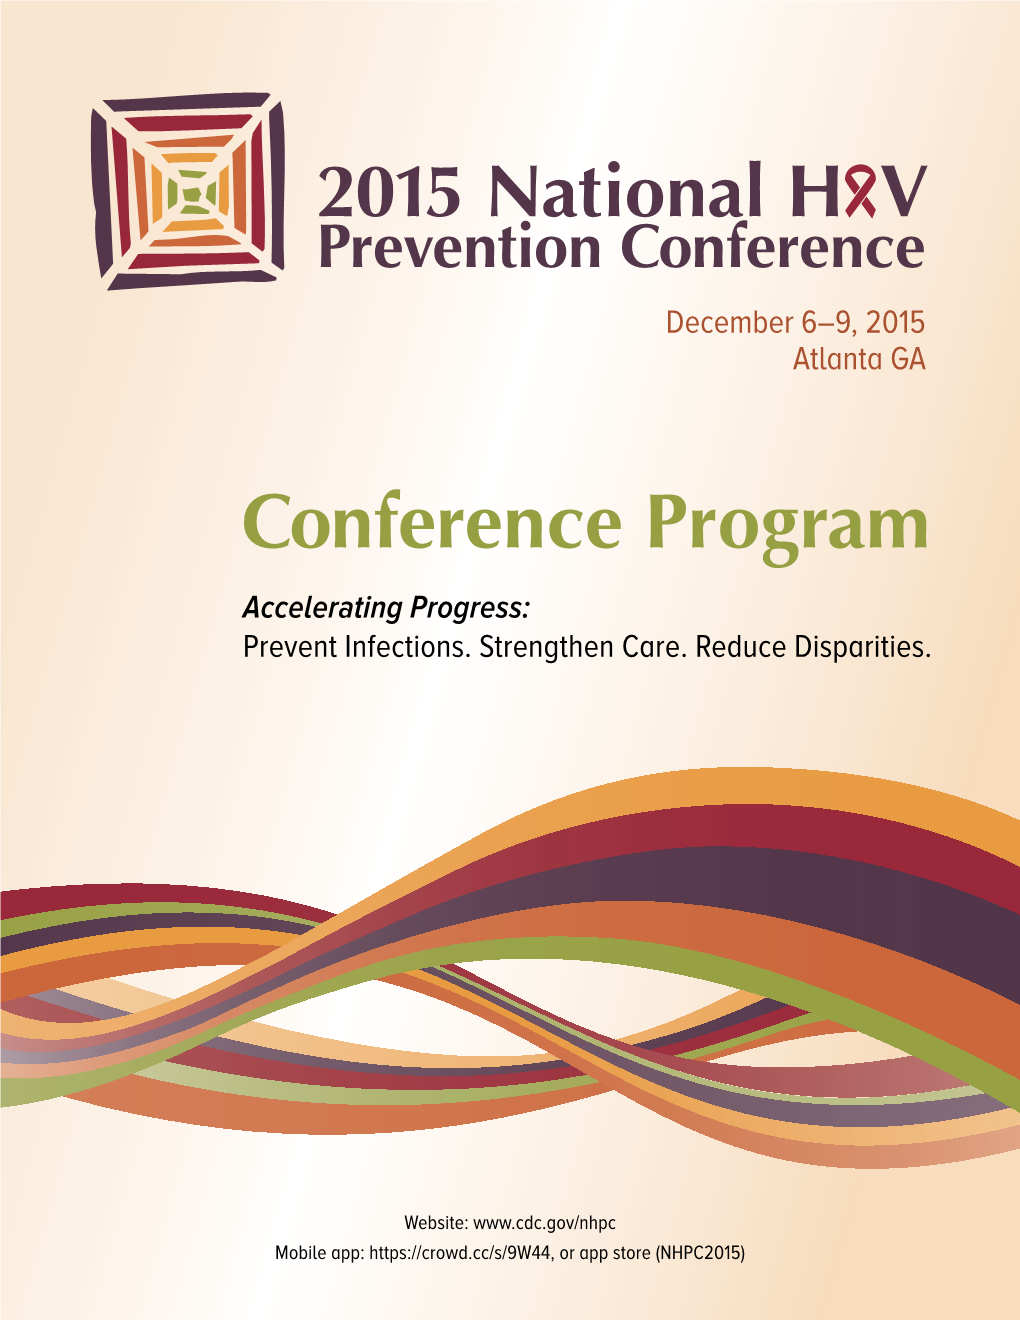 2015 National HIV Prevention Conference, and Thank You for Participating